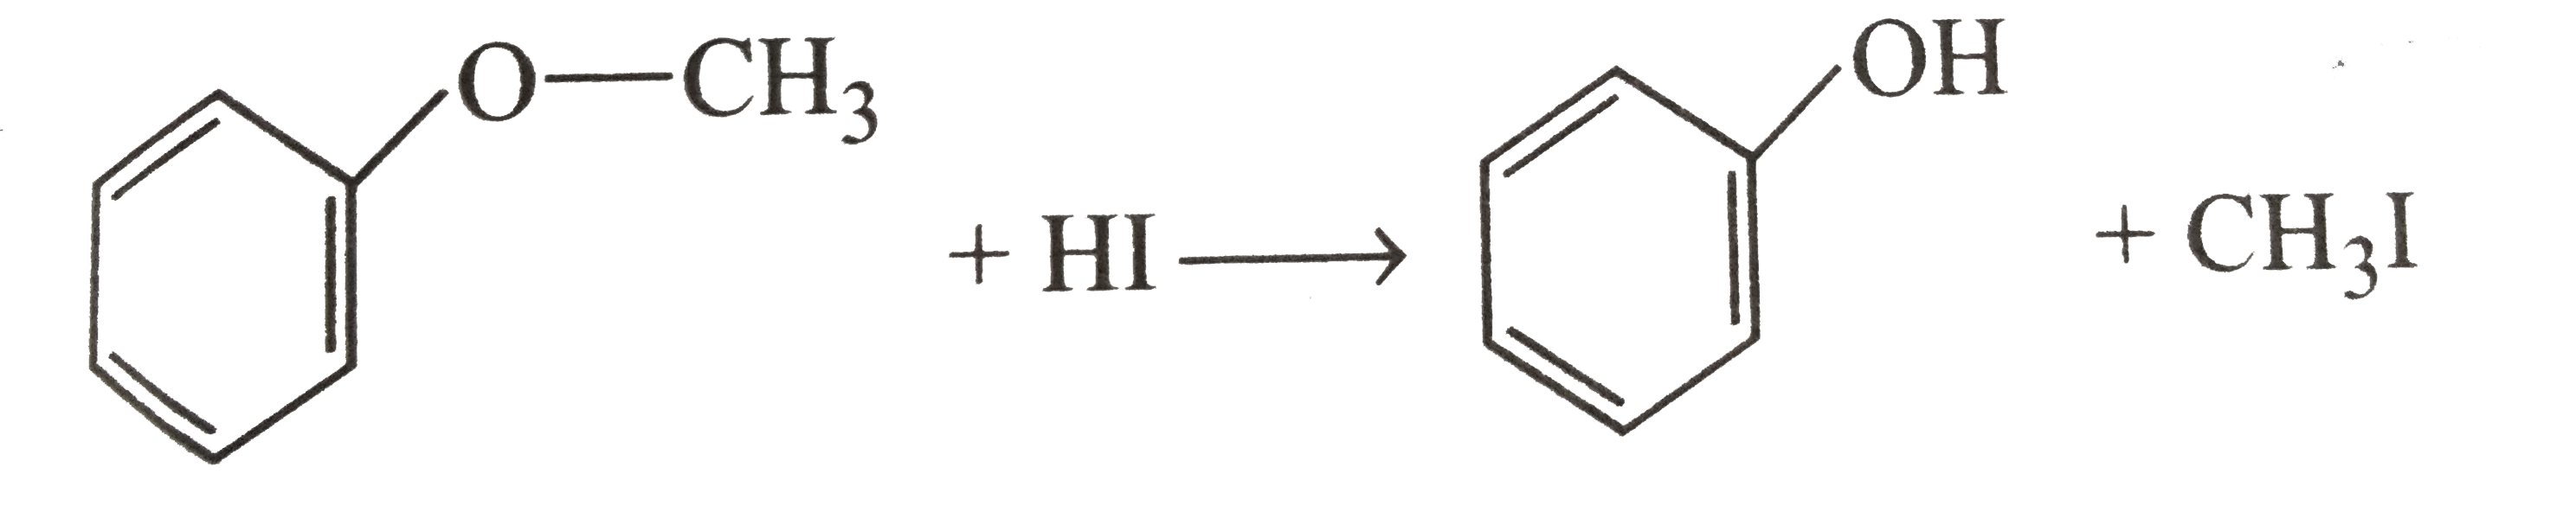 Carbon-oxygent bond in ethers can be cleaved b halogen acids, sulphuric acid, phosphorus pentachlodie, etc. The cleavage of C-O bond take place under drastic conditions with excess of hydrogen halides.   R-O-R+2HX rarr  2RX +H(2)O   If hydrogen halide is not taken in excess then a molecule of alcohol and alkyl halide are formed.   R-O-R+HI overset(373K) (rarr) R-OH+R-I   The order of reactivity of hydrogen halides towards the given reaction depends on the bond strength of halogenated acids, weaker is the H-X bond, greter is its reactivity. In case of unsymmetrical ethers, the site of cleavage is such that the halide is formed from the alkyl group which is smaller in size. However, when one of the alkyl group is tertiary, the halide formed is the tertiary halide.   Indiate wheterh the following statements // reactions are true or false.    Alkyl aryl ethers react with HI to give phenol and alkyl halide.      (a) True      (b) False